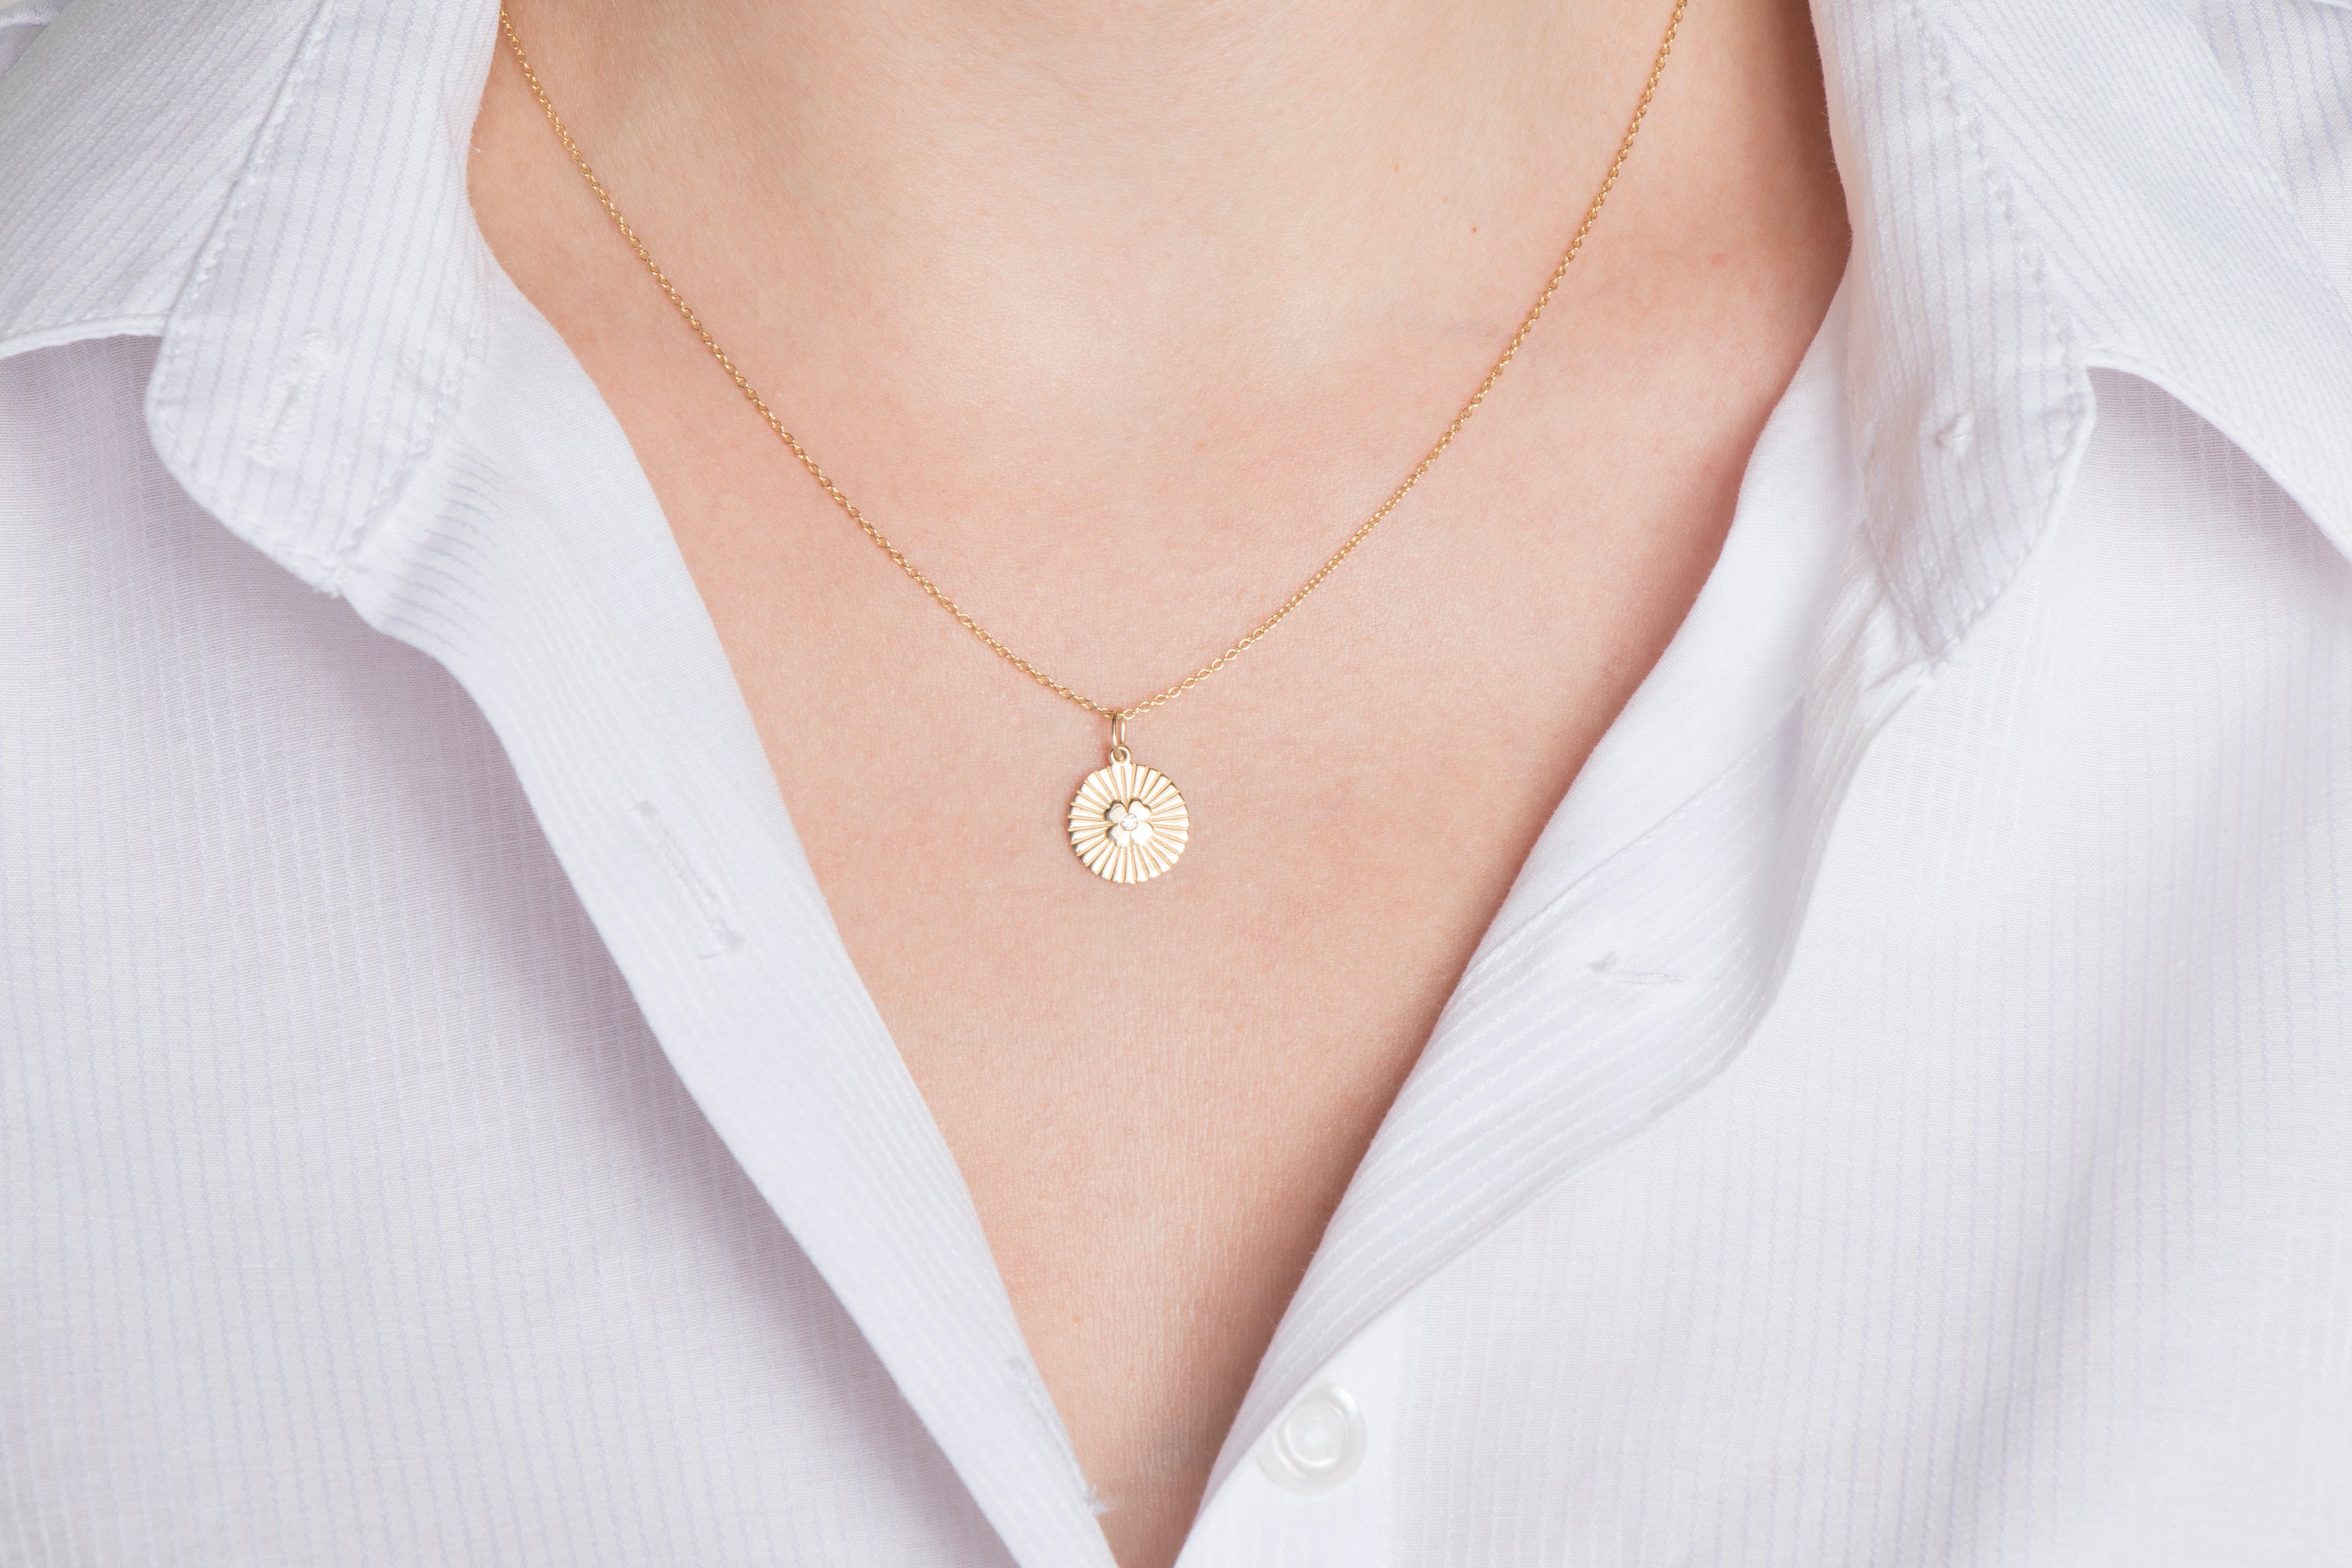 Diamond Clover Charm Necklace in 14K Yellow Gold / My Mini Good Luck